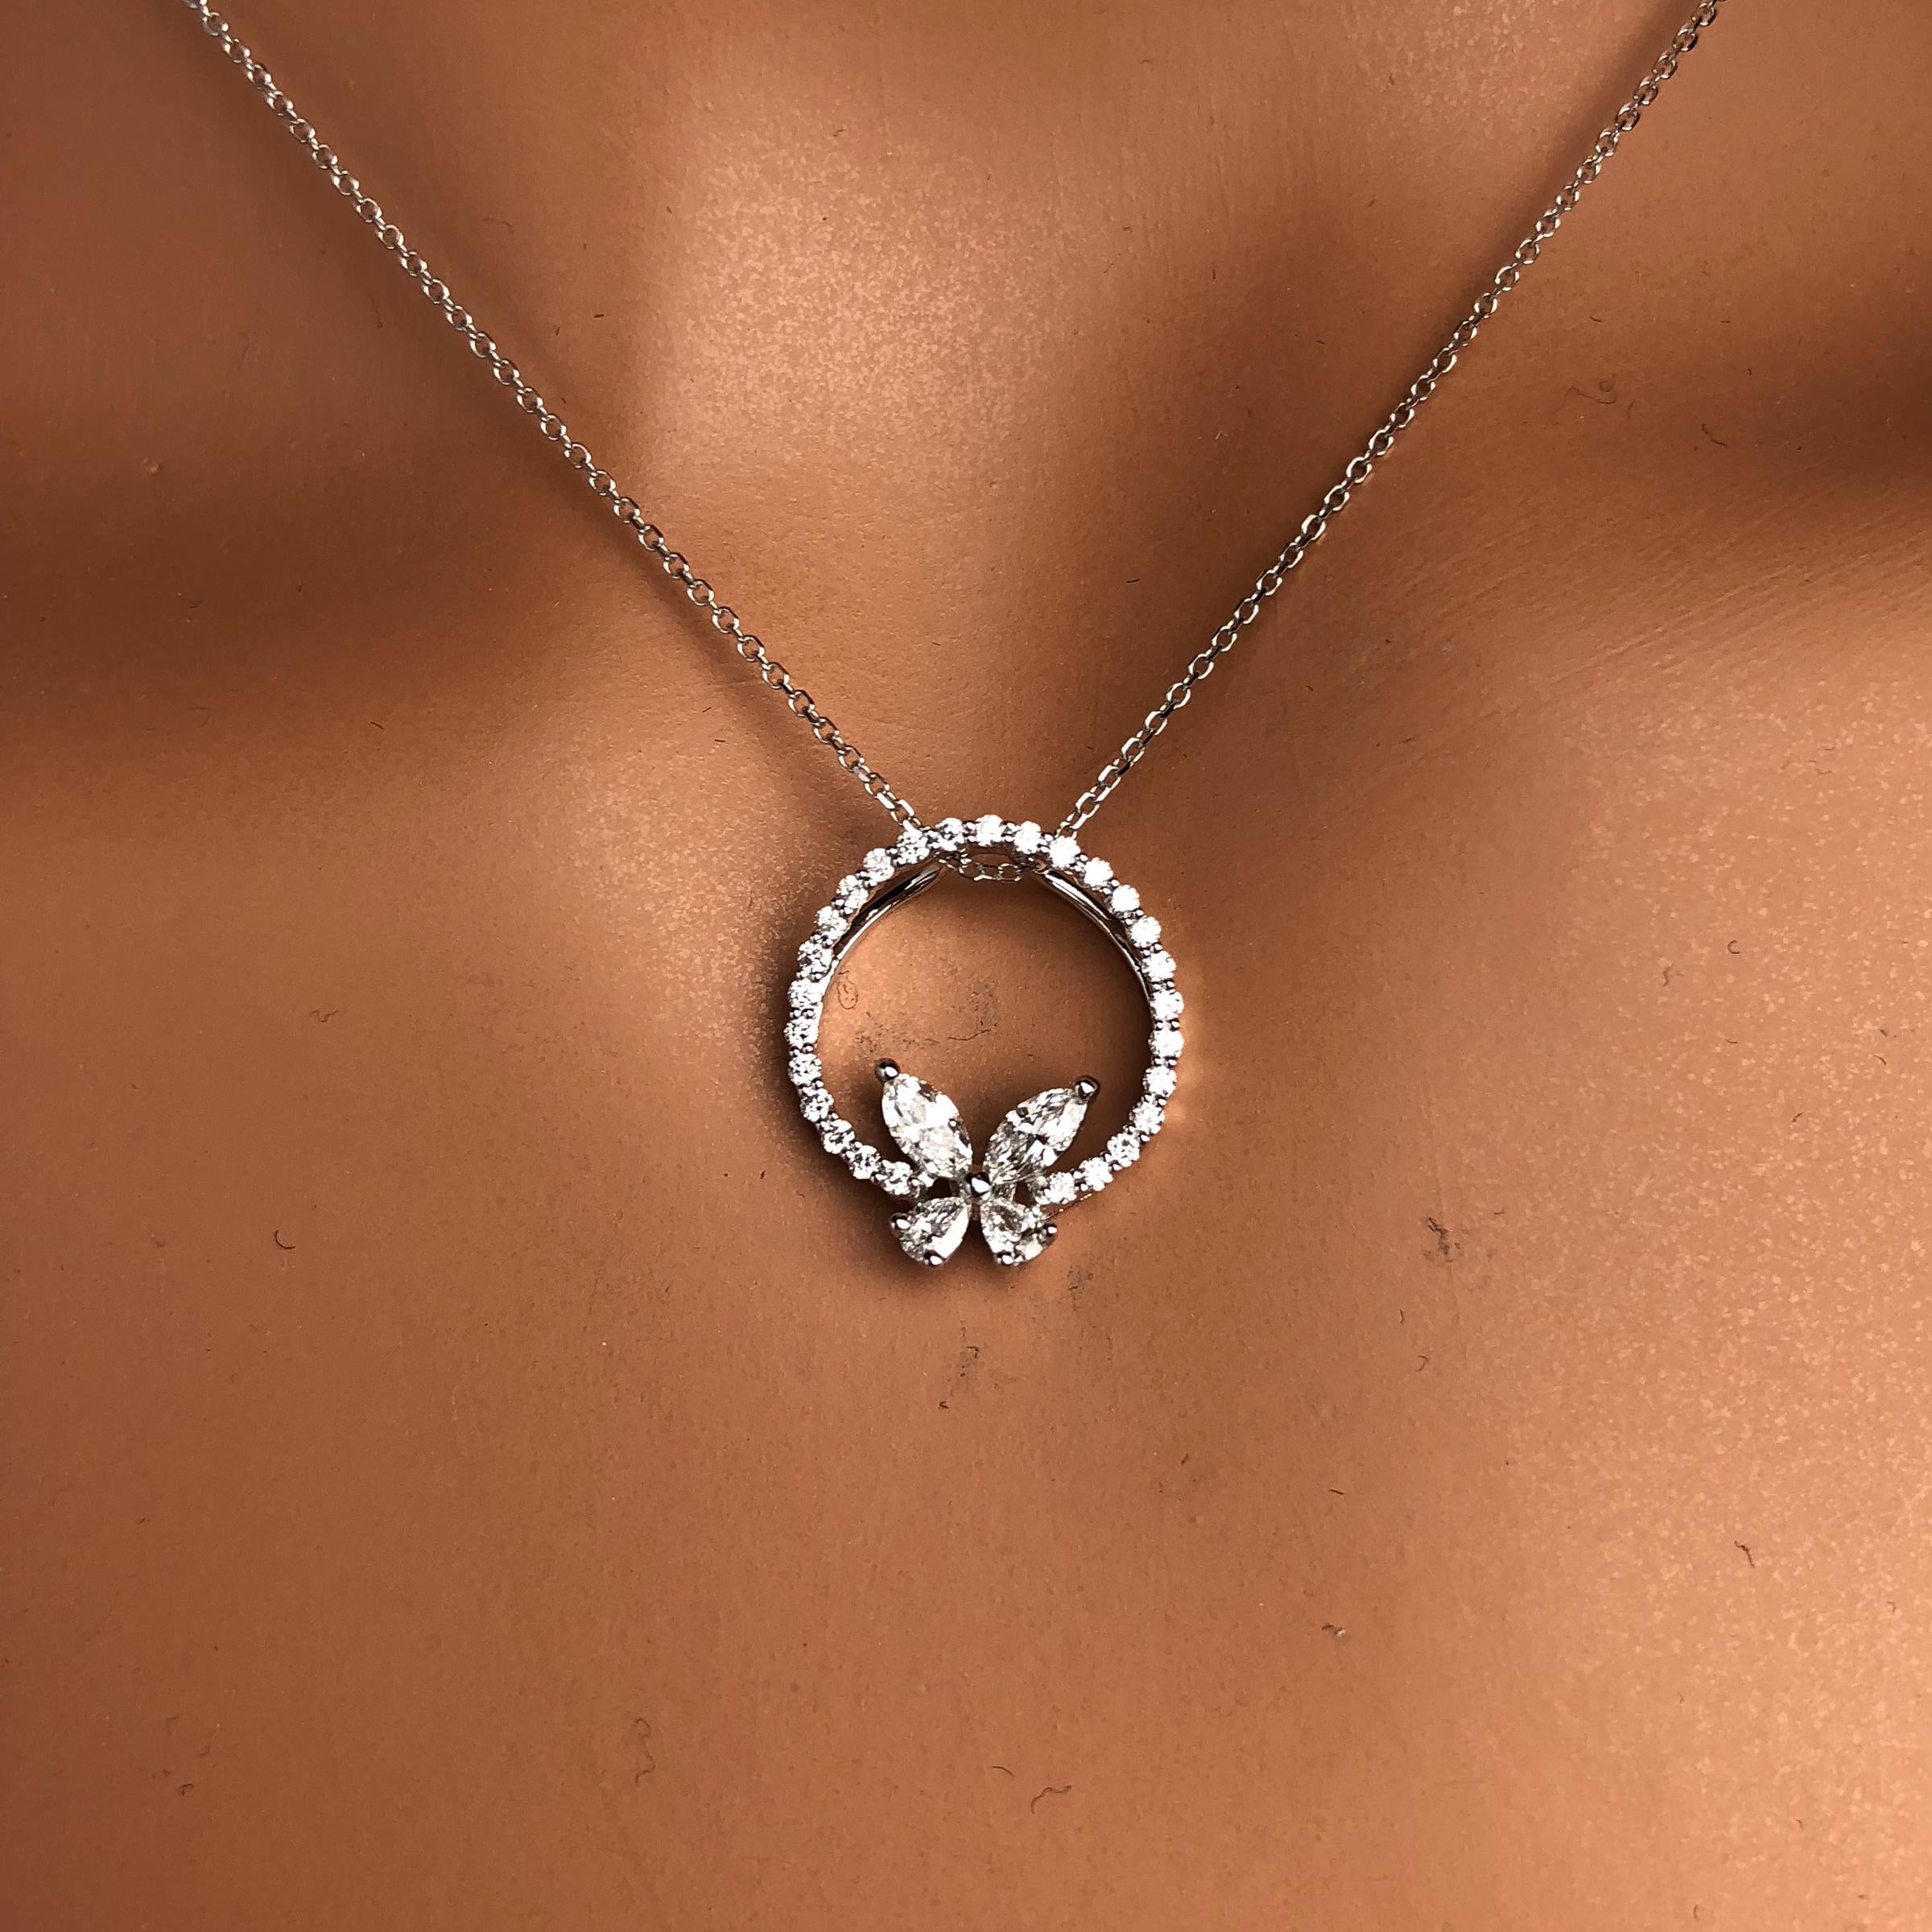 Experience the enchantment of our delicate Diamond Butterfly Pendant, where the ethereal beauty of nature meets the brilliance of fine jewelry. A butterfly, delicately crafted from shimmering pear and marquise diamonds, is gracefully perched on a